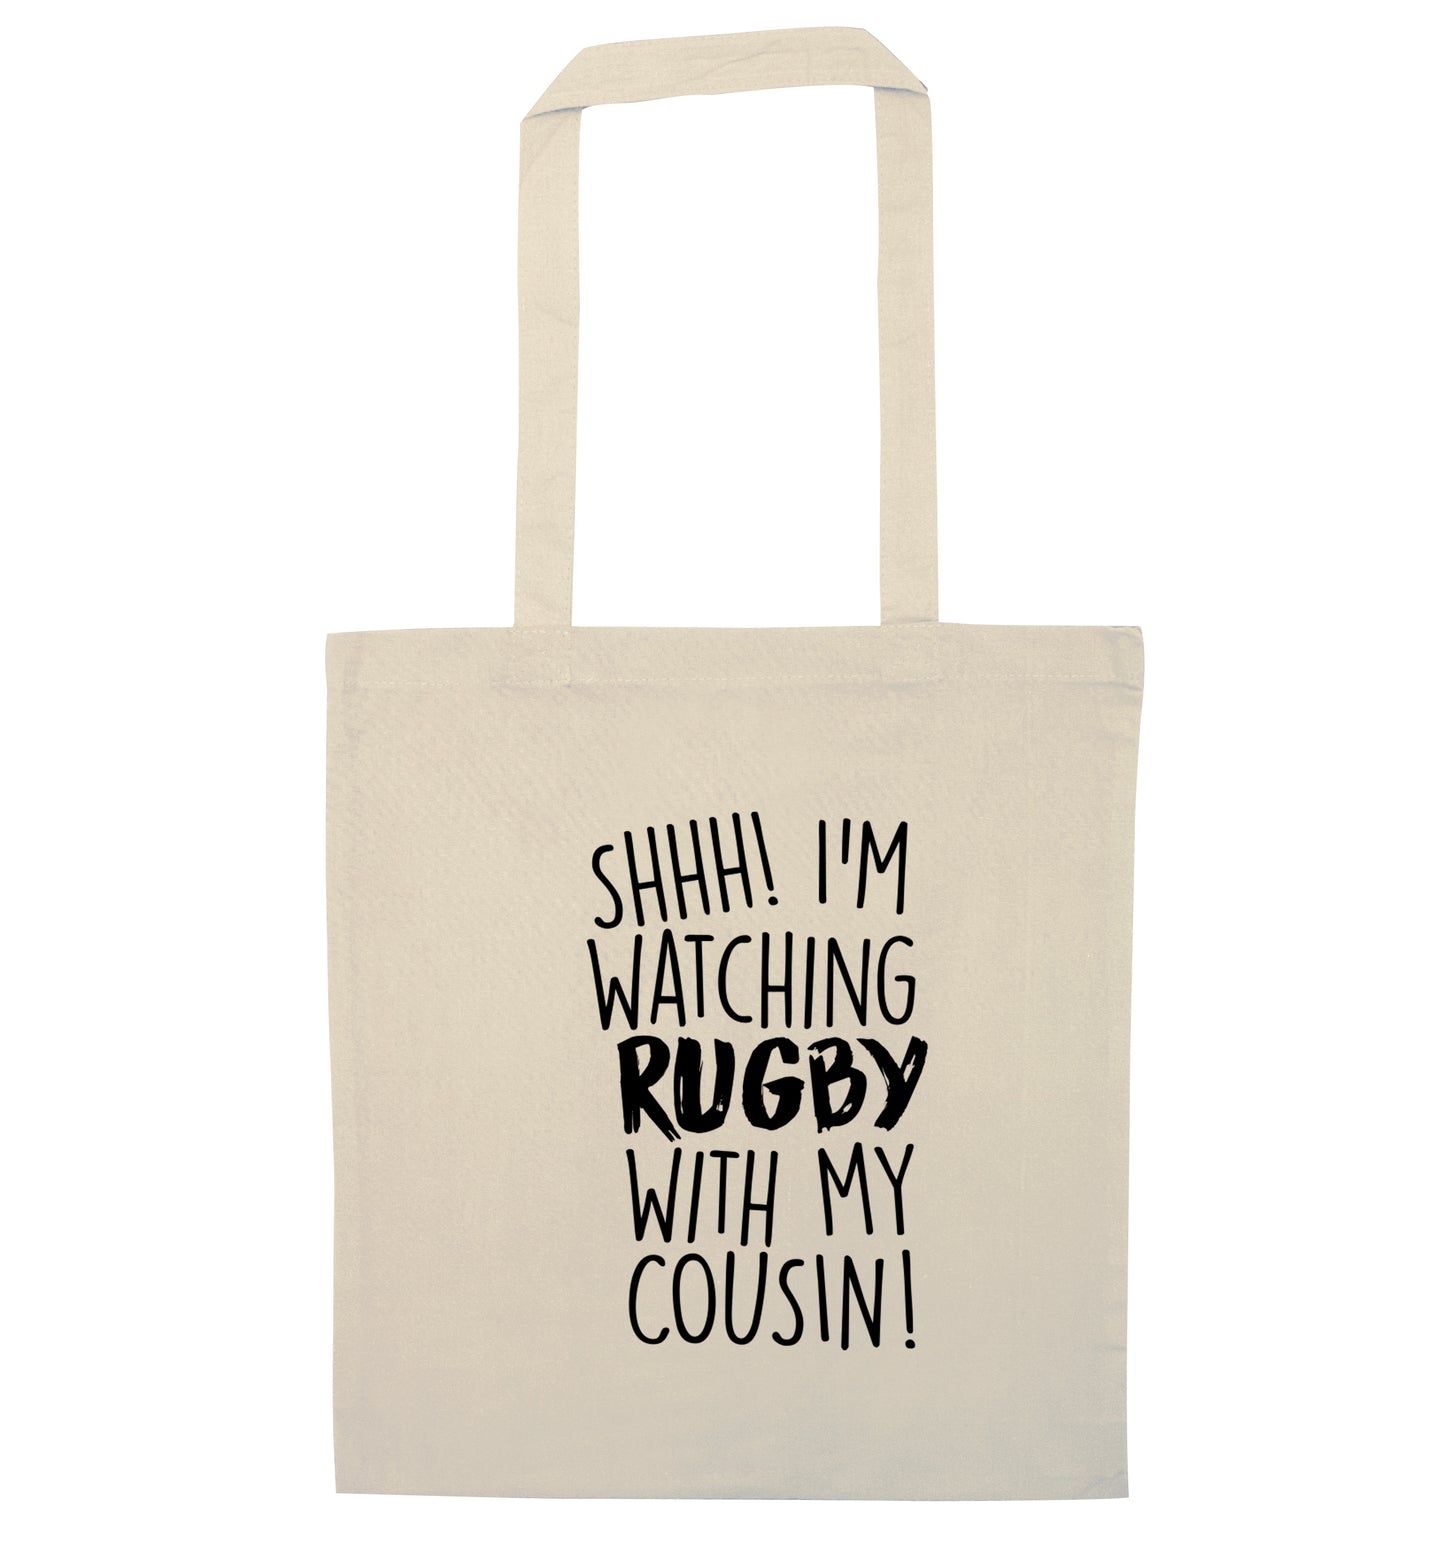 Shhh I'm watching rugby with my cousin natural tote bag